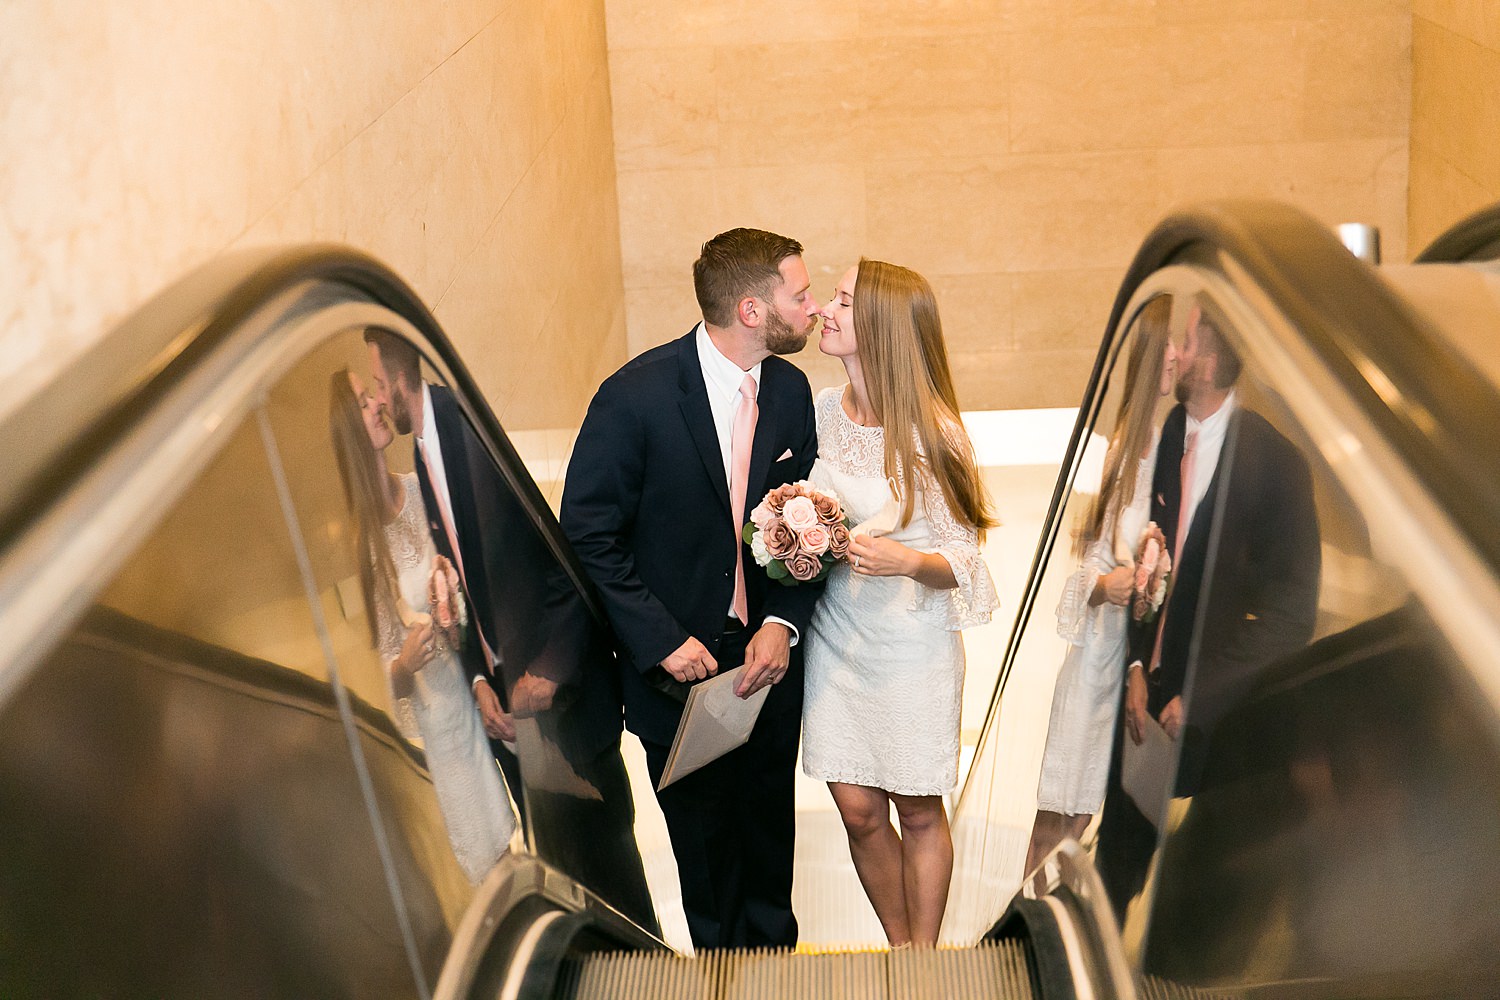 Couple goes up escalator after their elopement at city hall in Chicago.